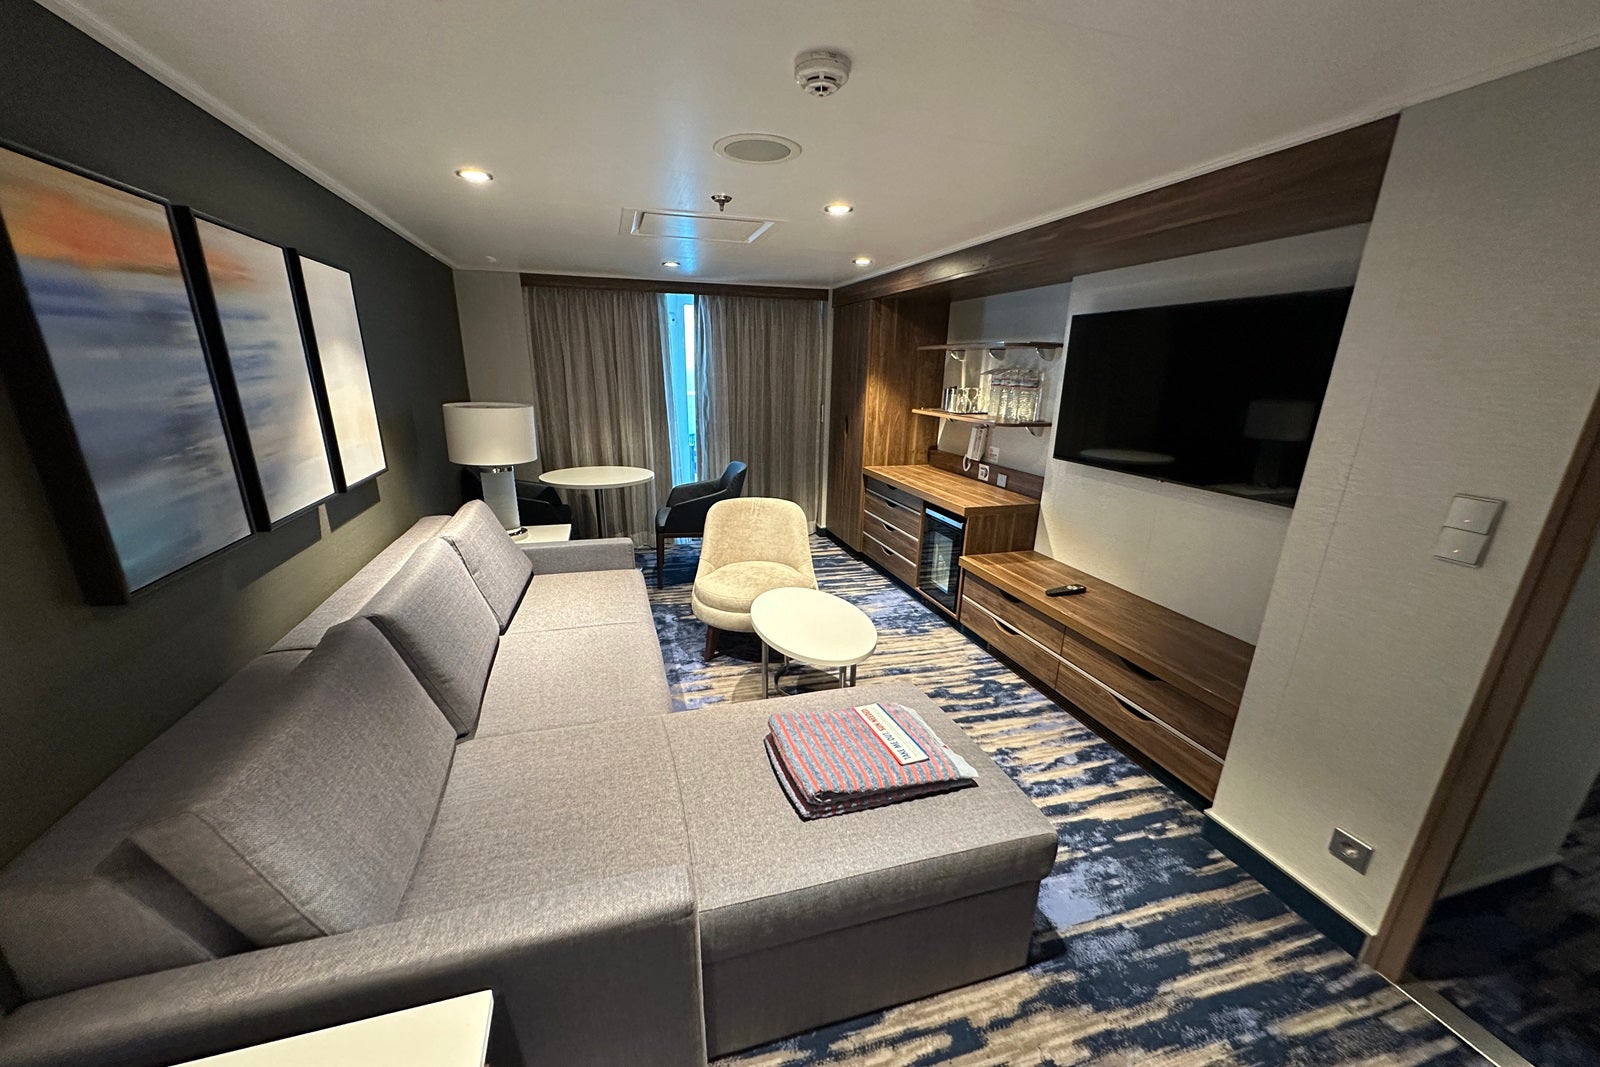 A living room in a suite on a cruise ship with a gray sofa, a table and chairs and a TV